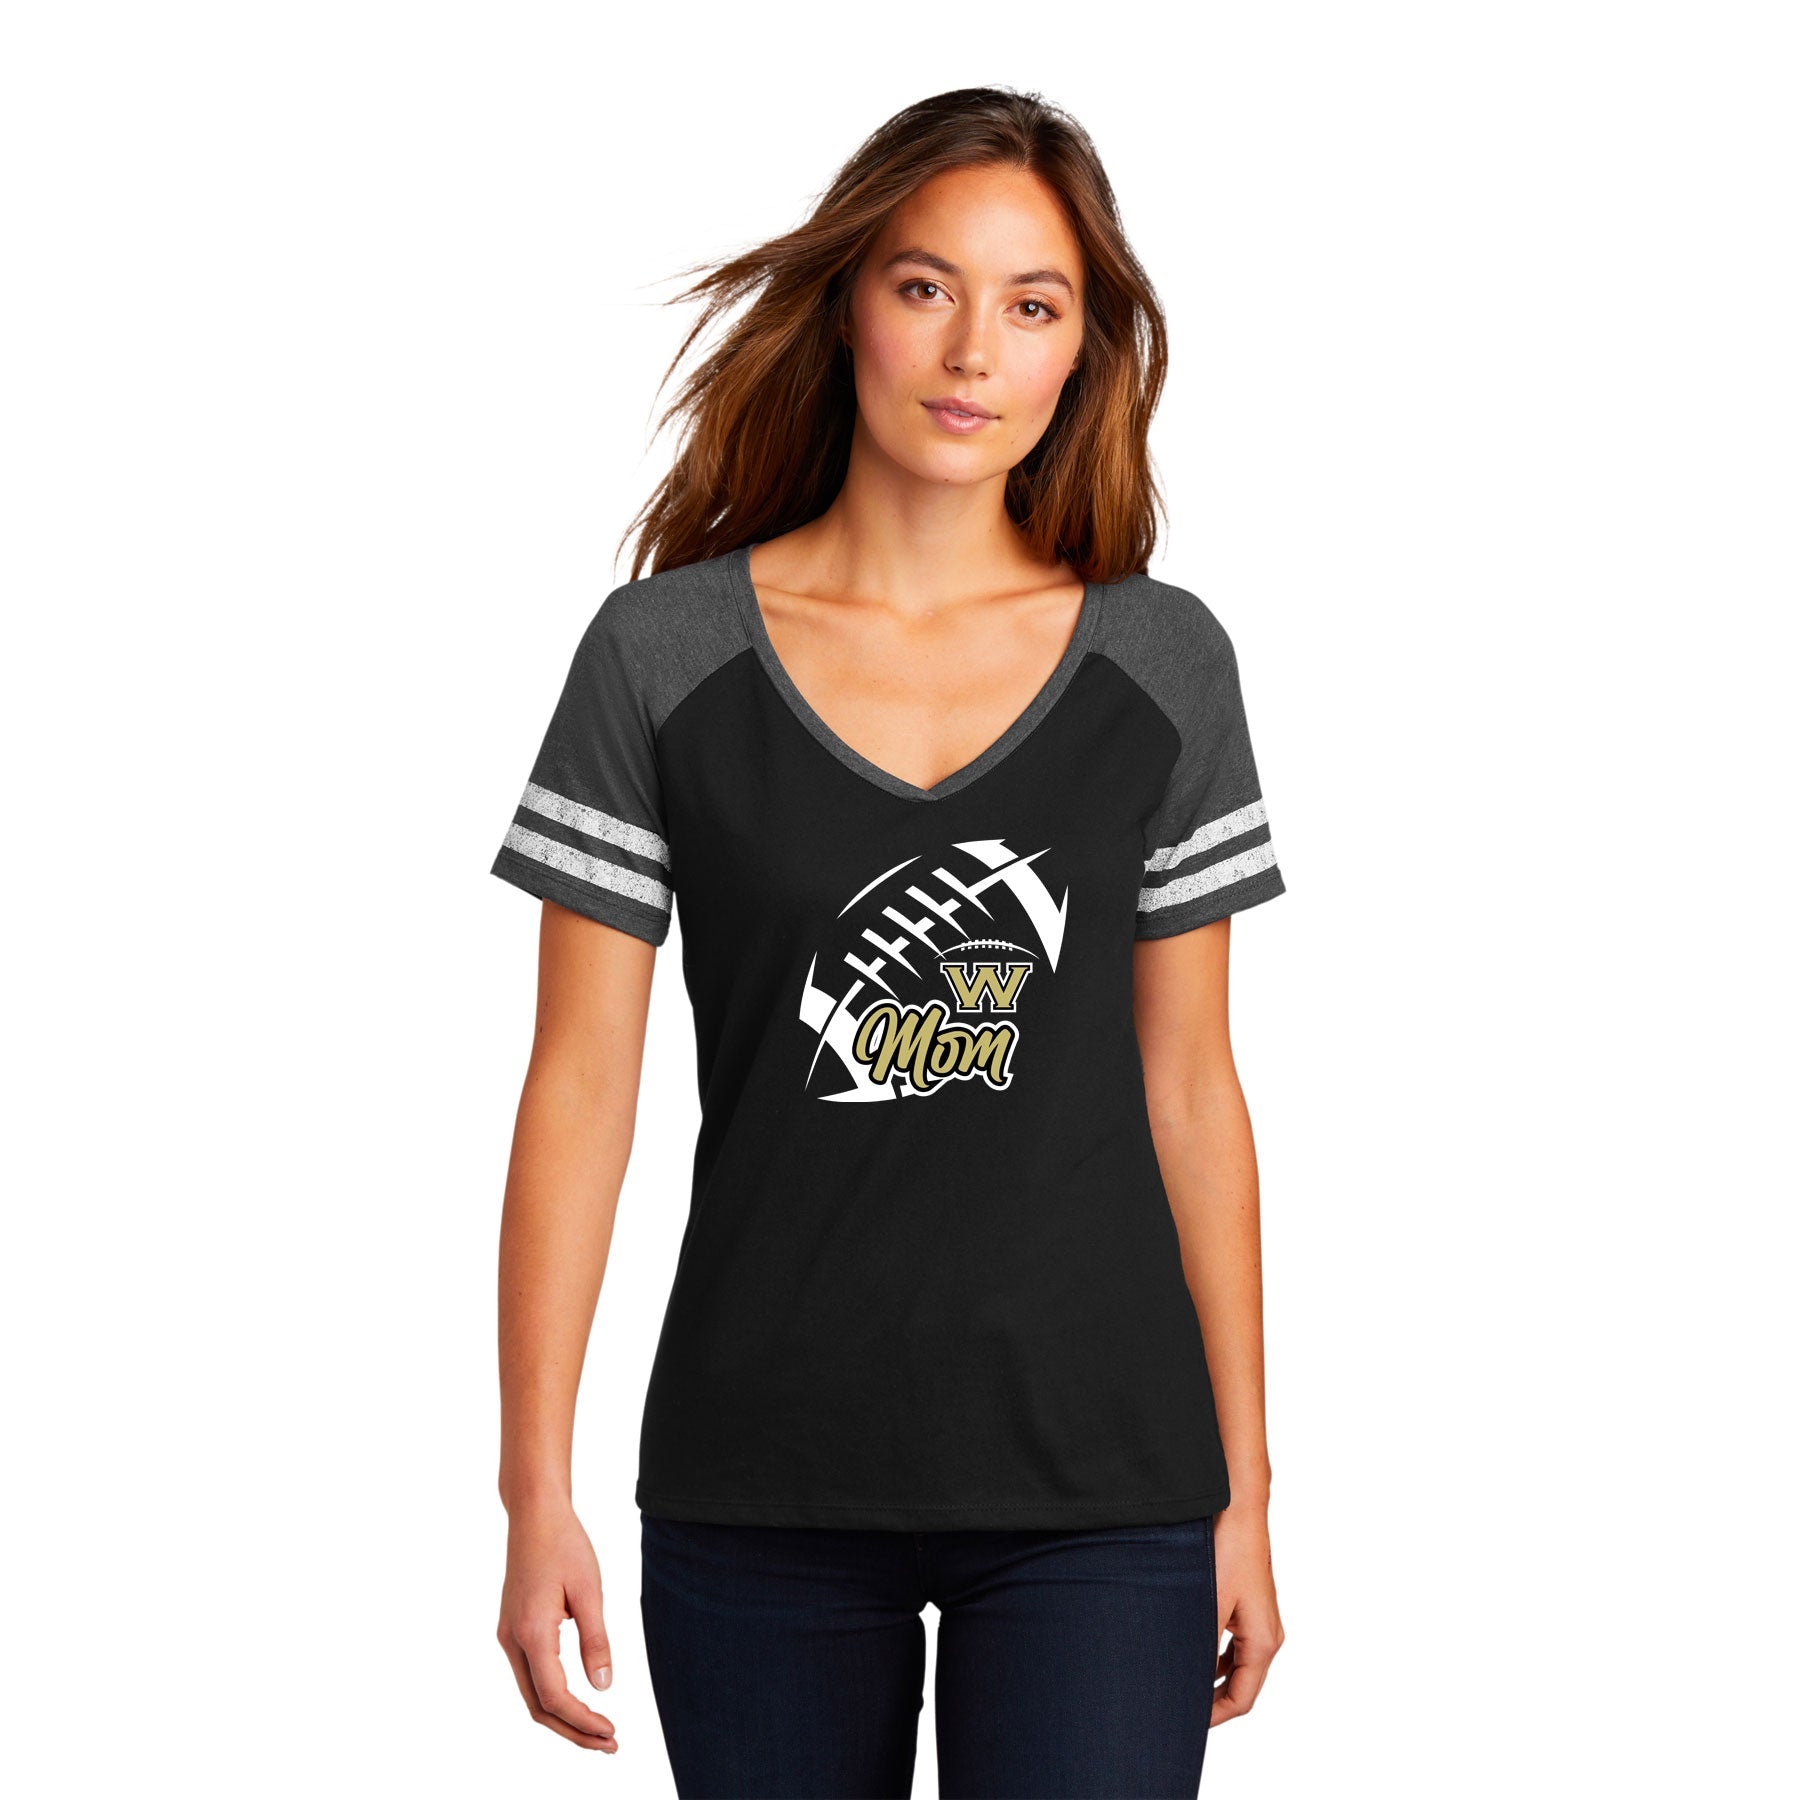 WESTVIEW FOOTBALL FRONT CHEST - WOMENÕS GAME V-NECK TEE